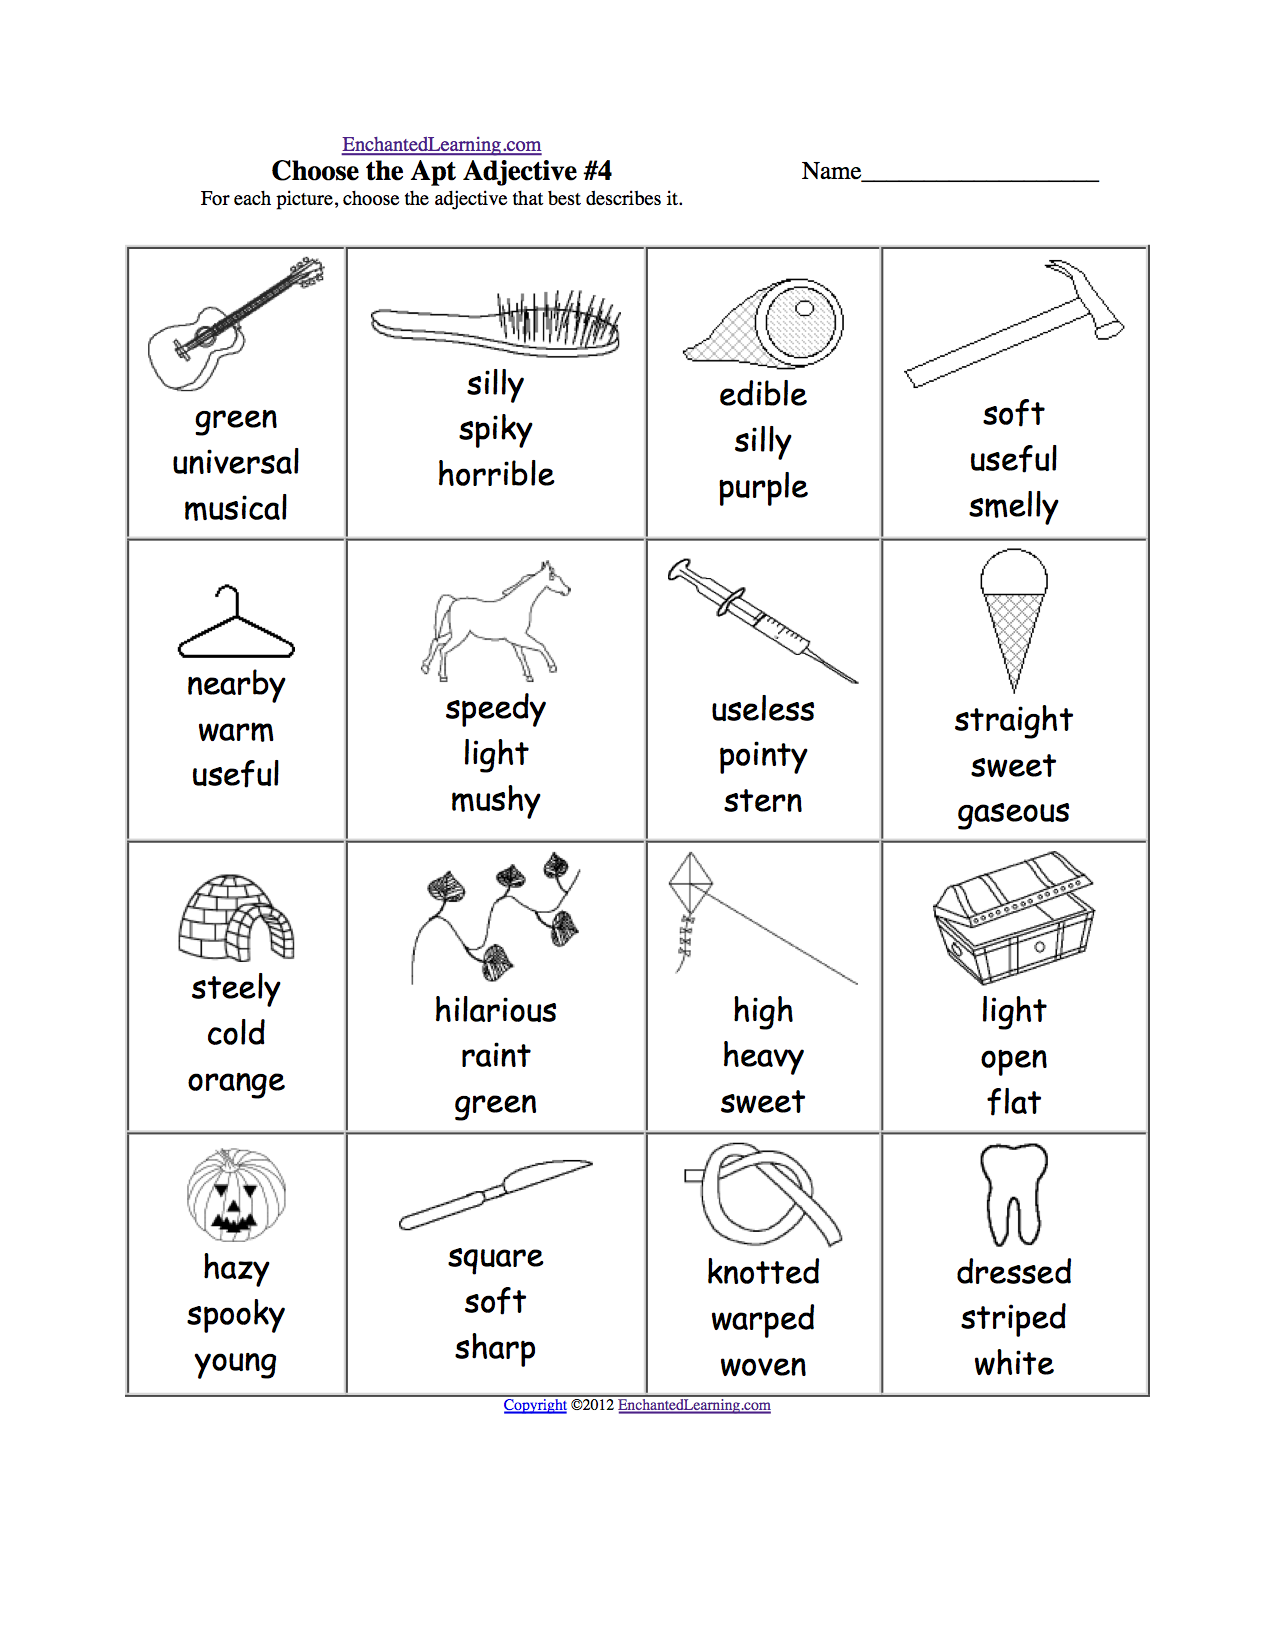 Adjective Activities and Worksheets: EnchantedLearning.com